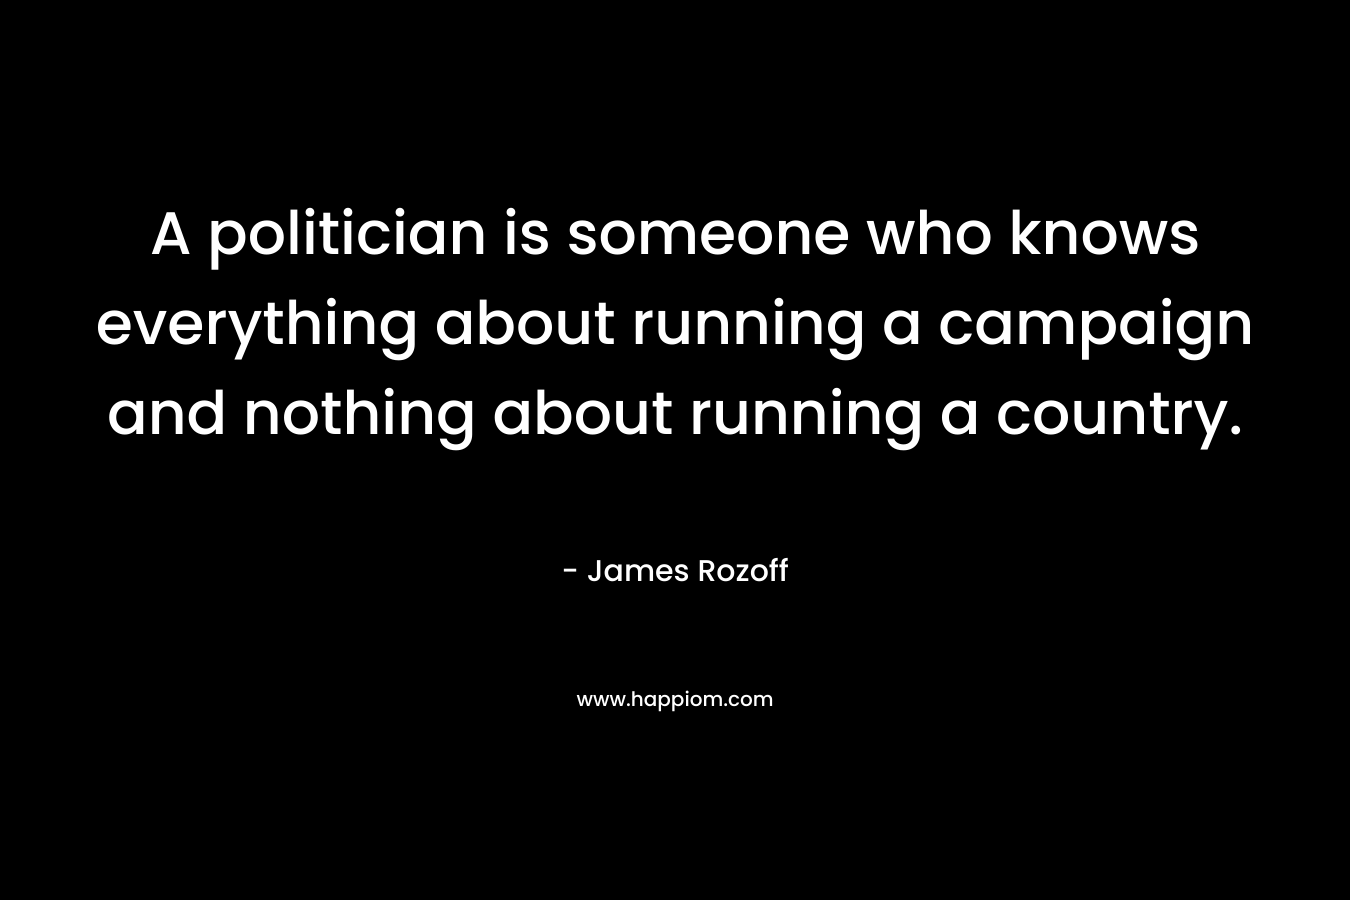 A politician is someone who knows everything about running a campaign and nothing about running a country.